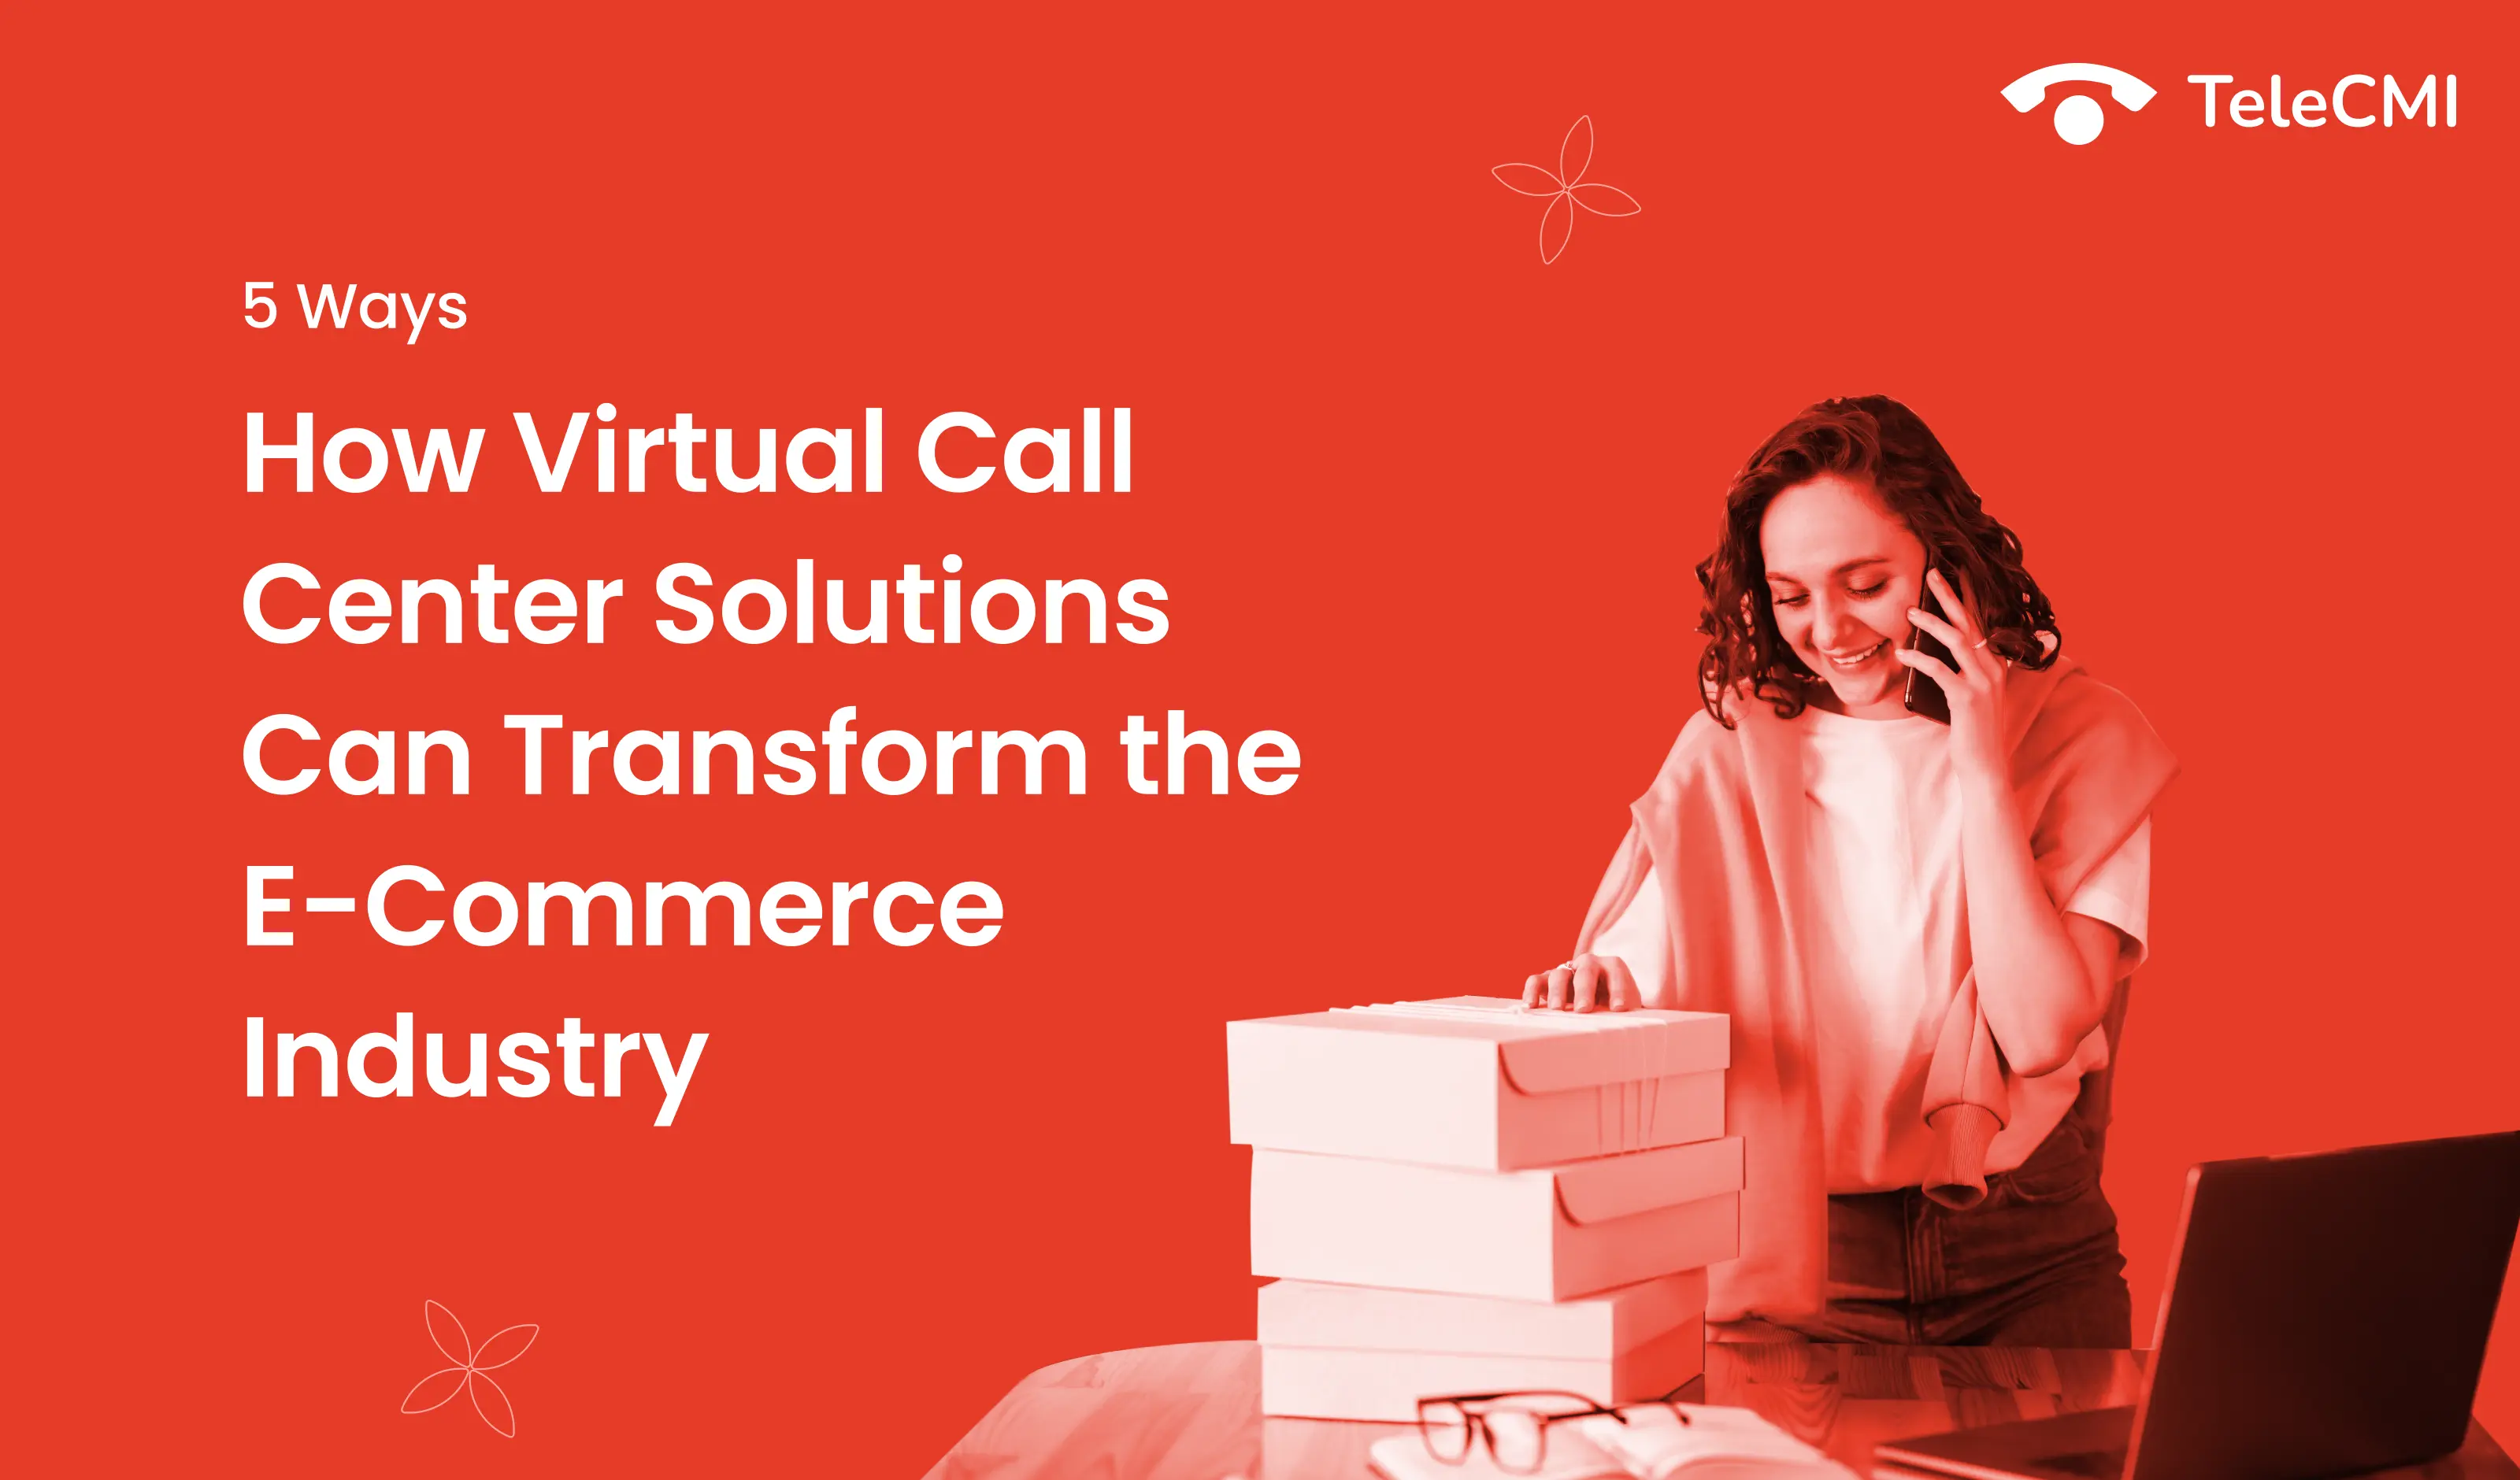 5 Ways How Virtual Call Center Solutions Can
                        Transform the E-Commerce Industry